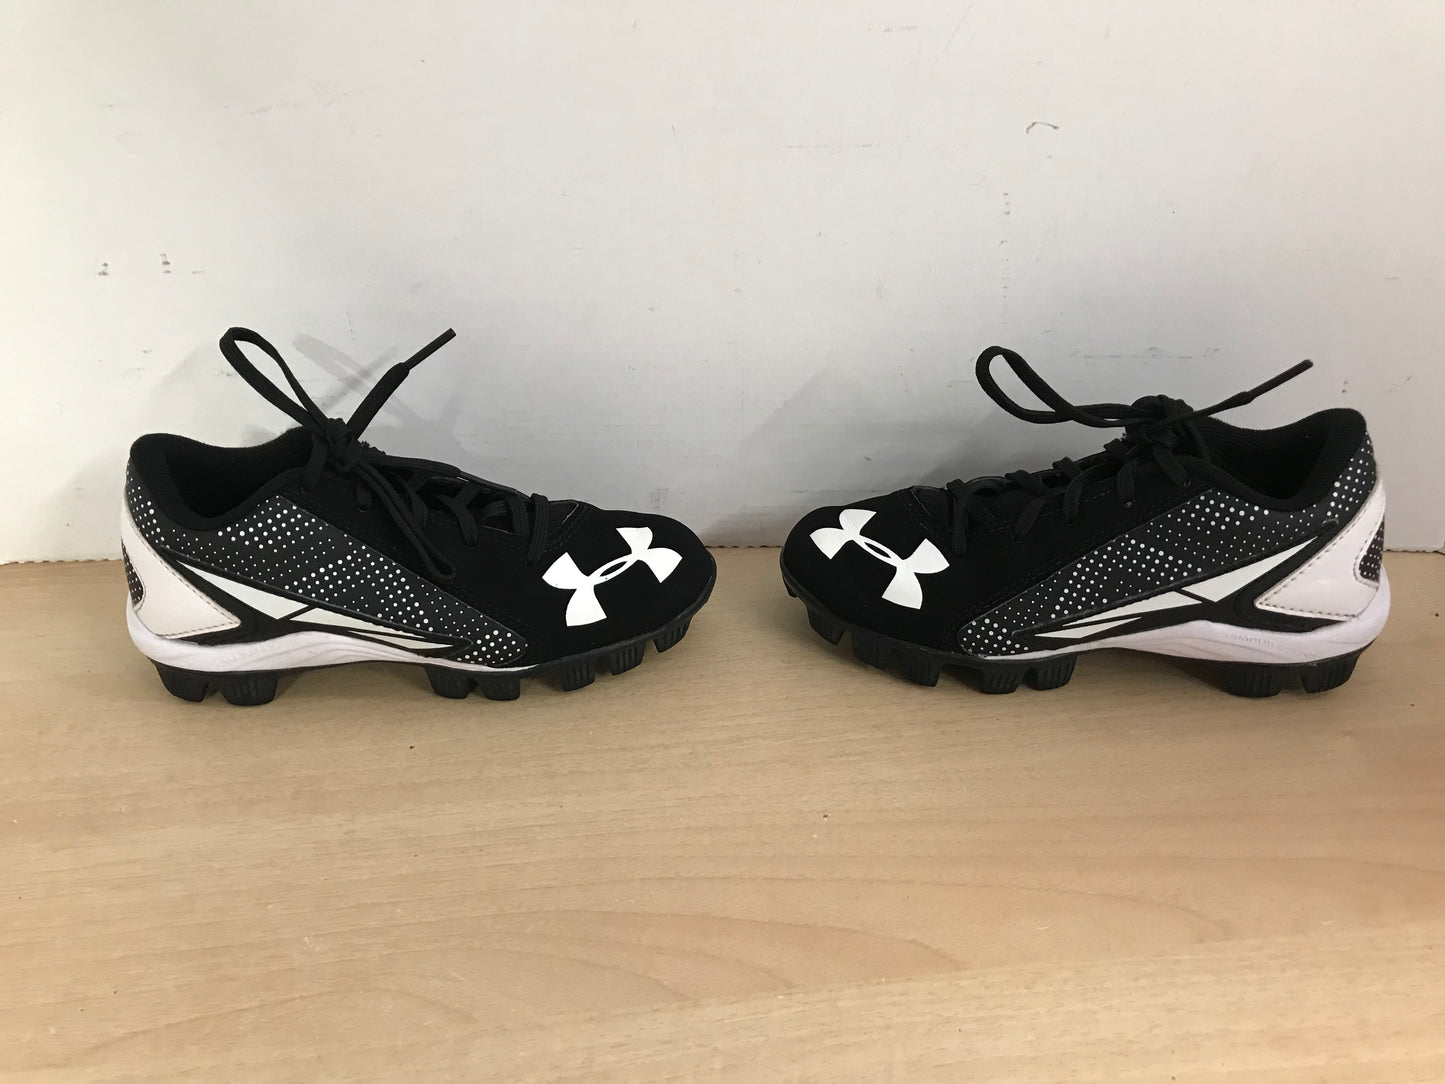 Baseball Shoes Cleats Child Size 13 Under Armour Black White Excellent